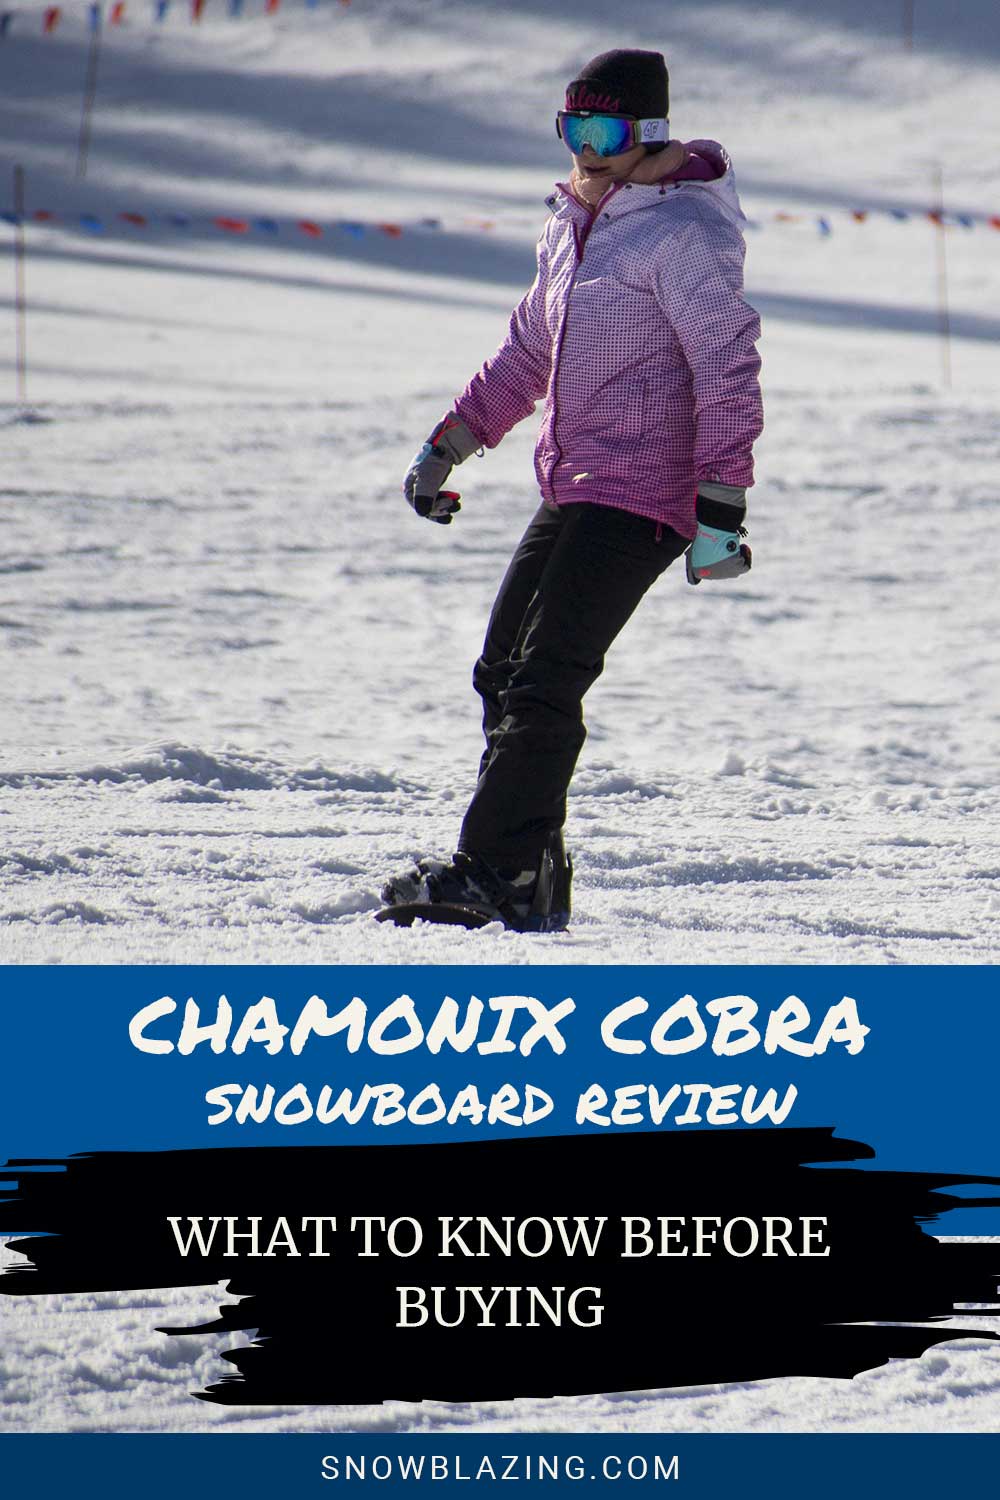 Person in pink jacket snowboarding - Chamonix Cobra Snowboard Review